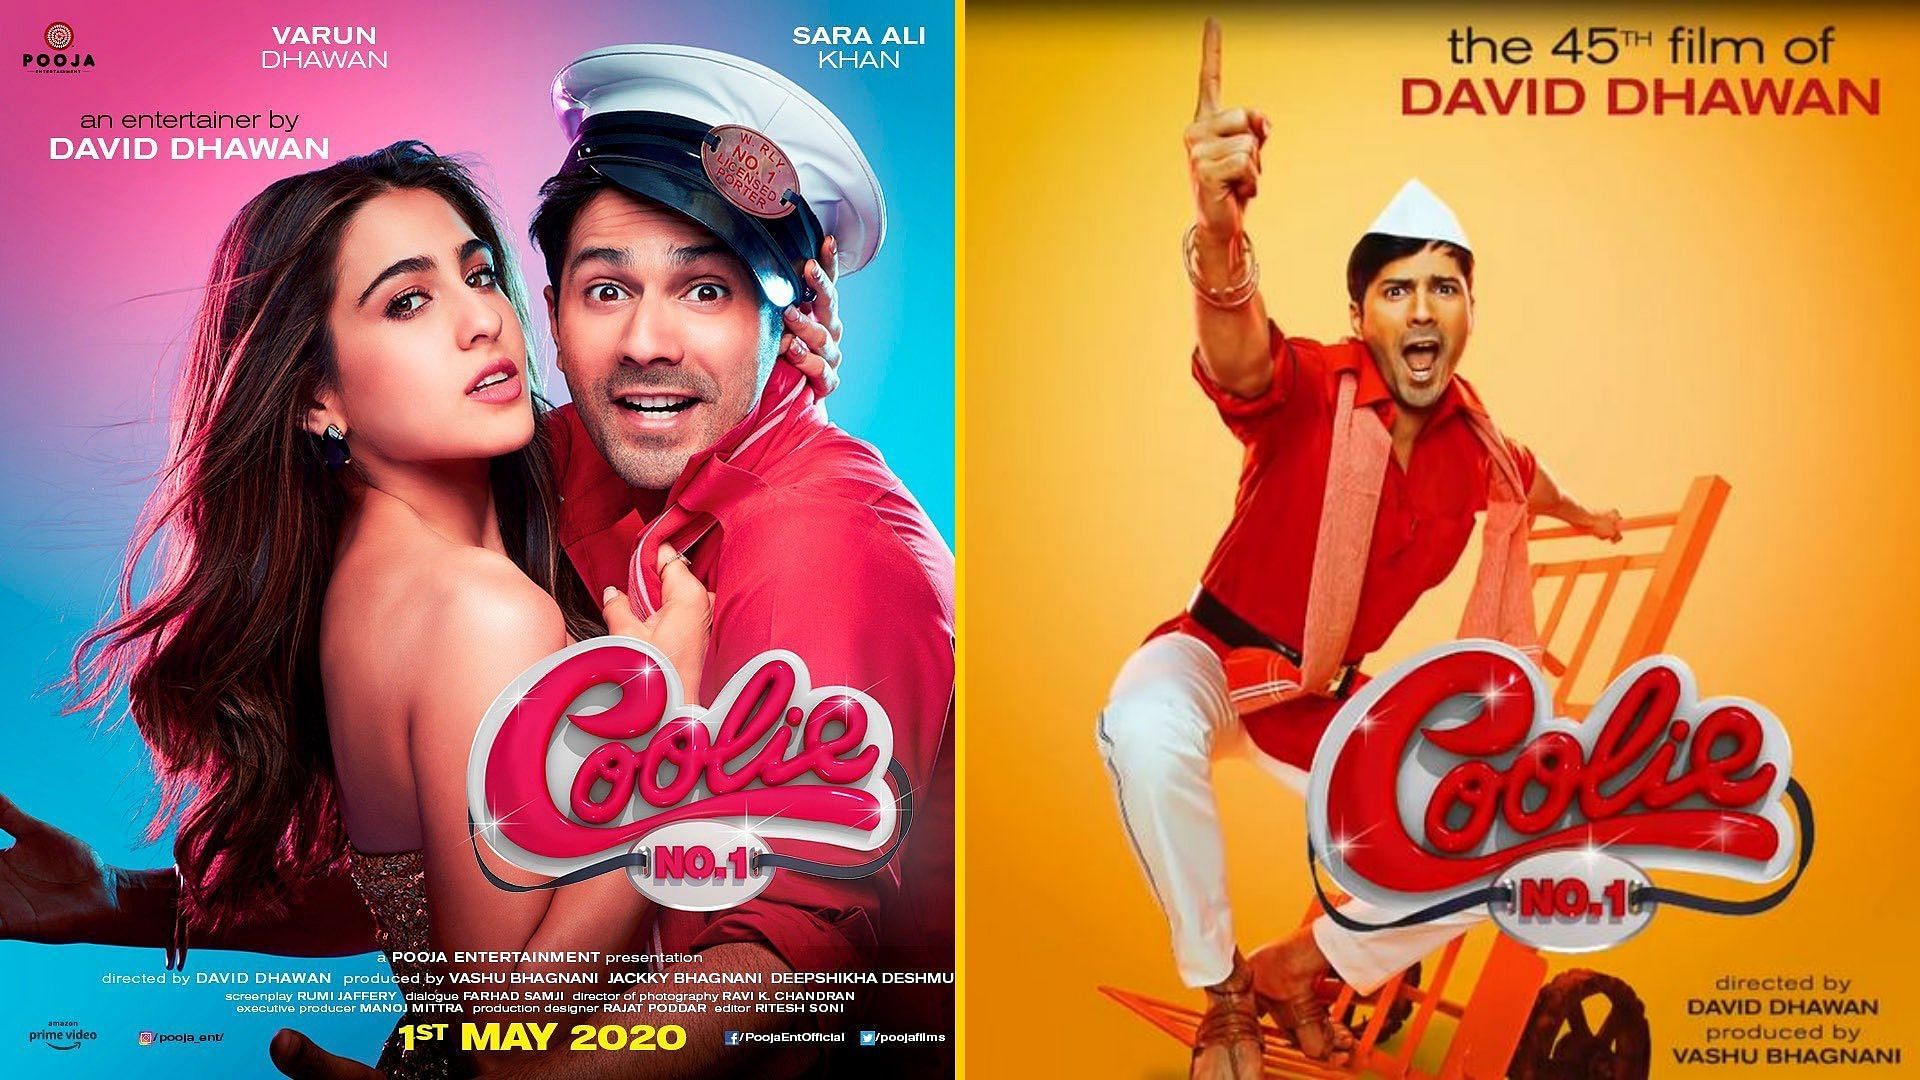 <i>Coolie No.1 </i>first look posters were released on Sara Ali Khan’s birthday